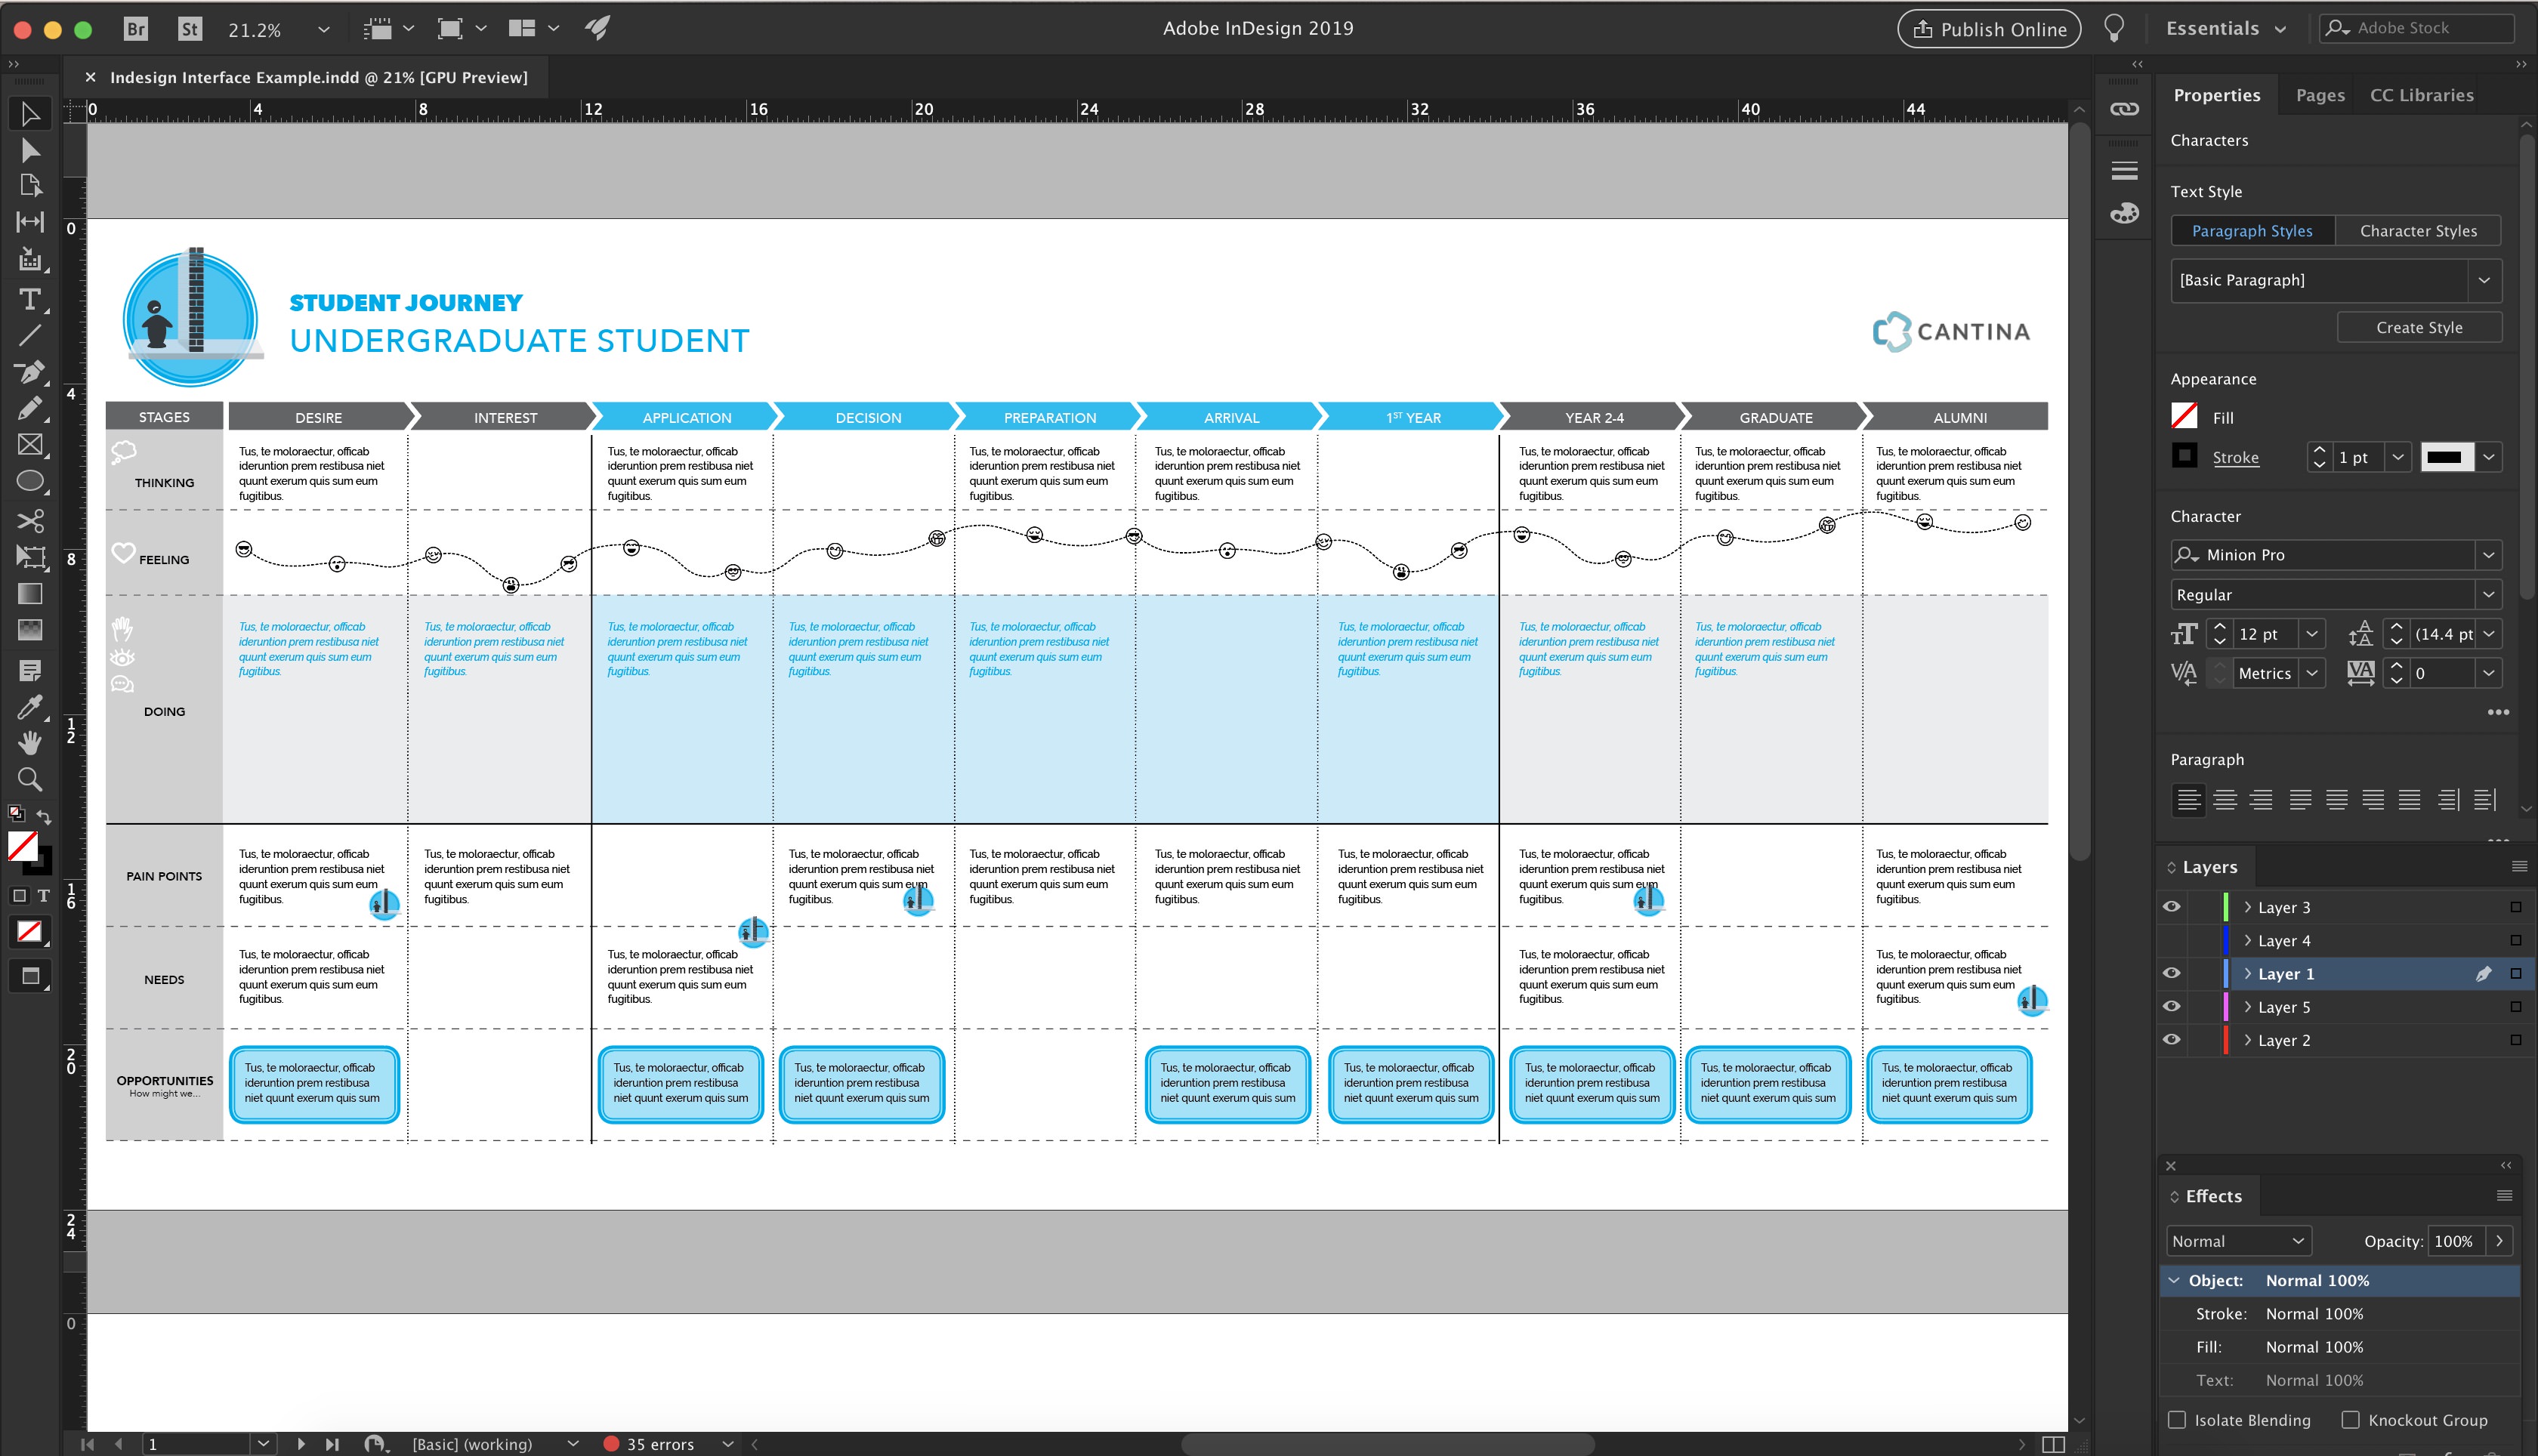 Screen capture of the InDesign interface, based on a custom journey map.